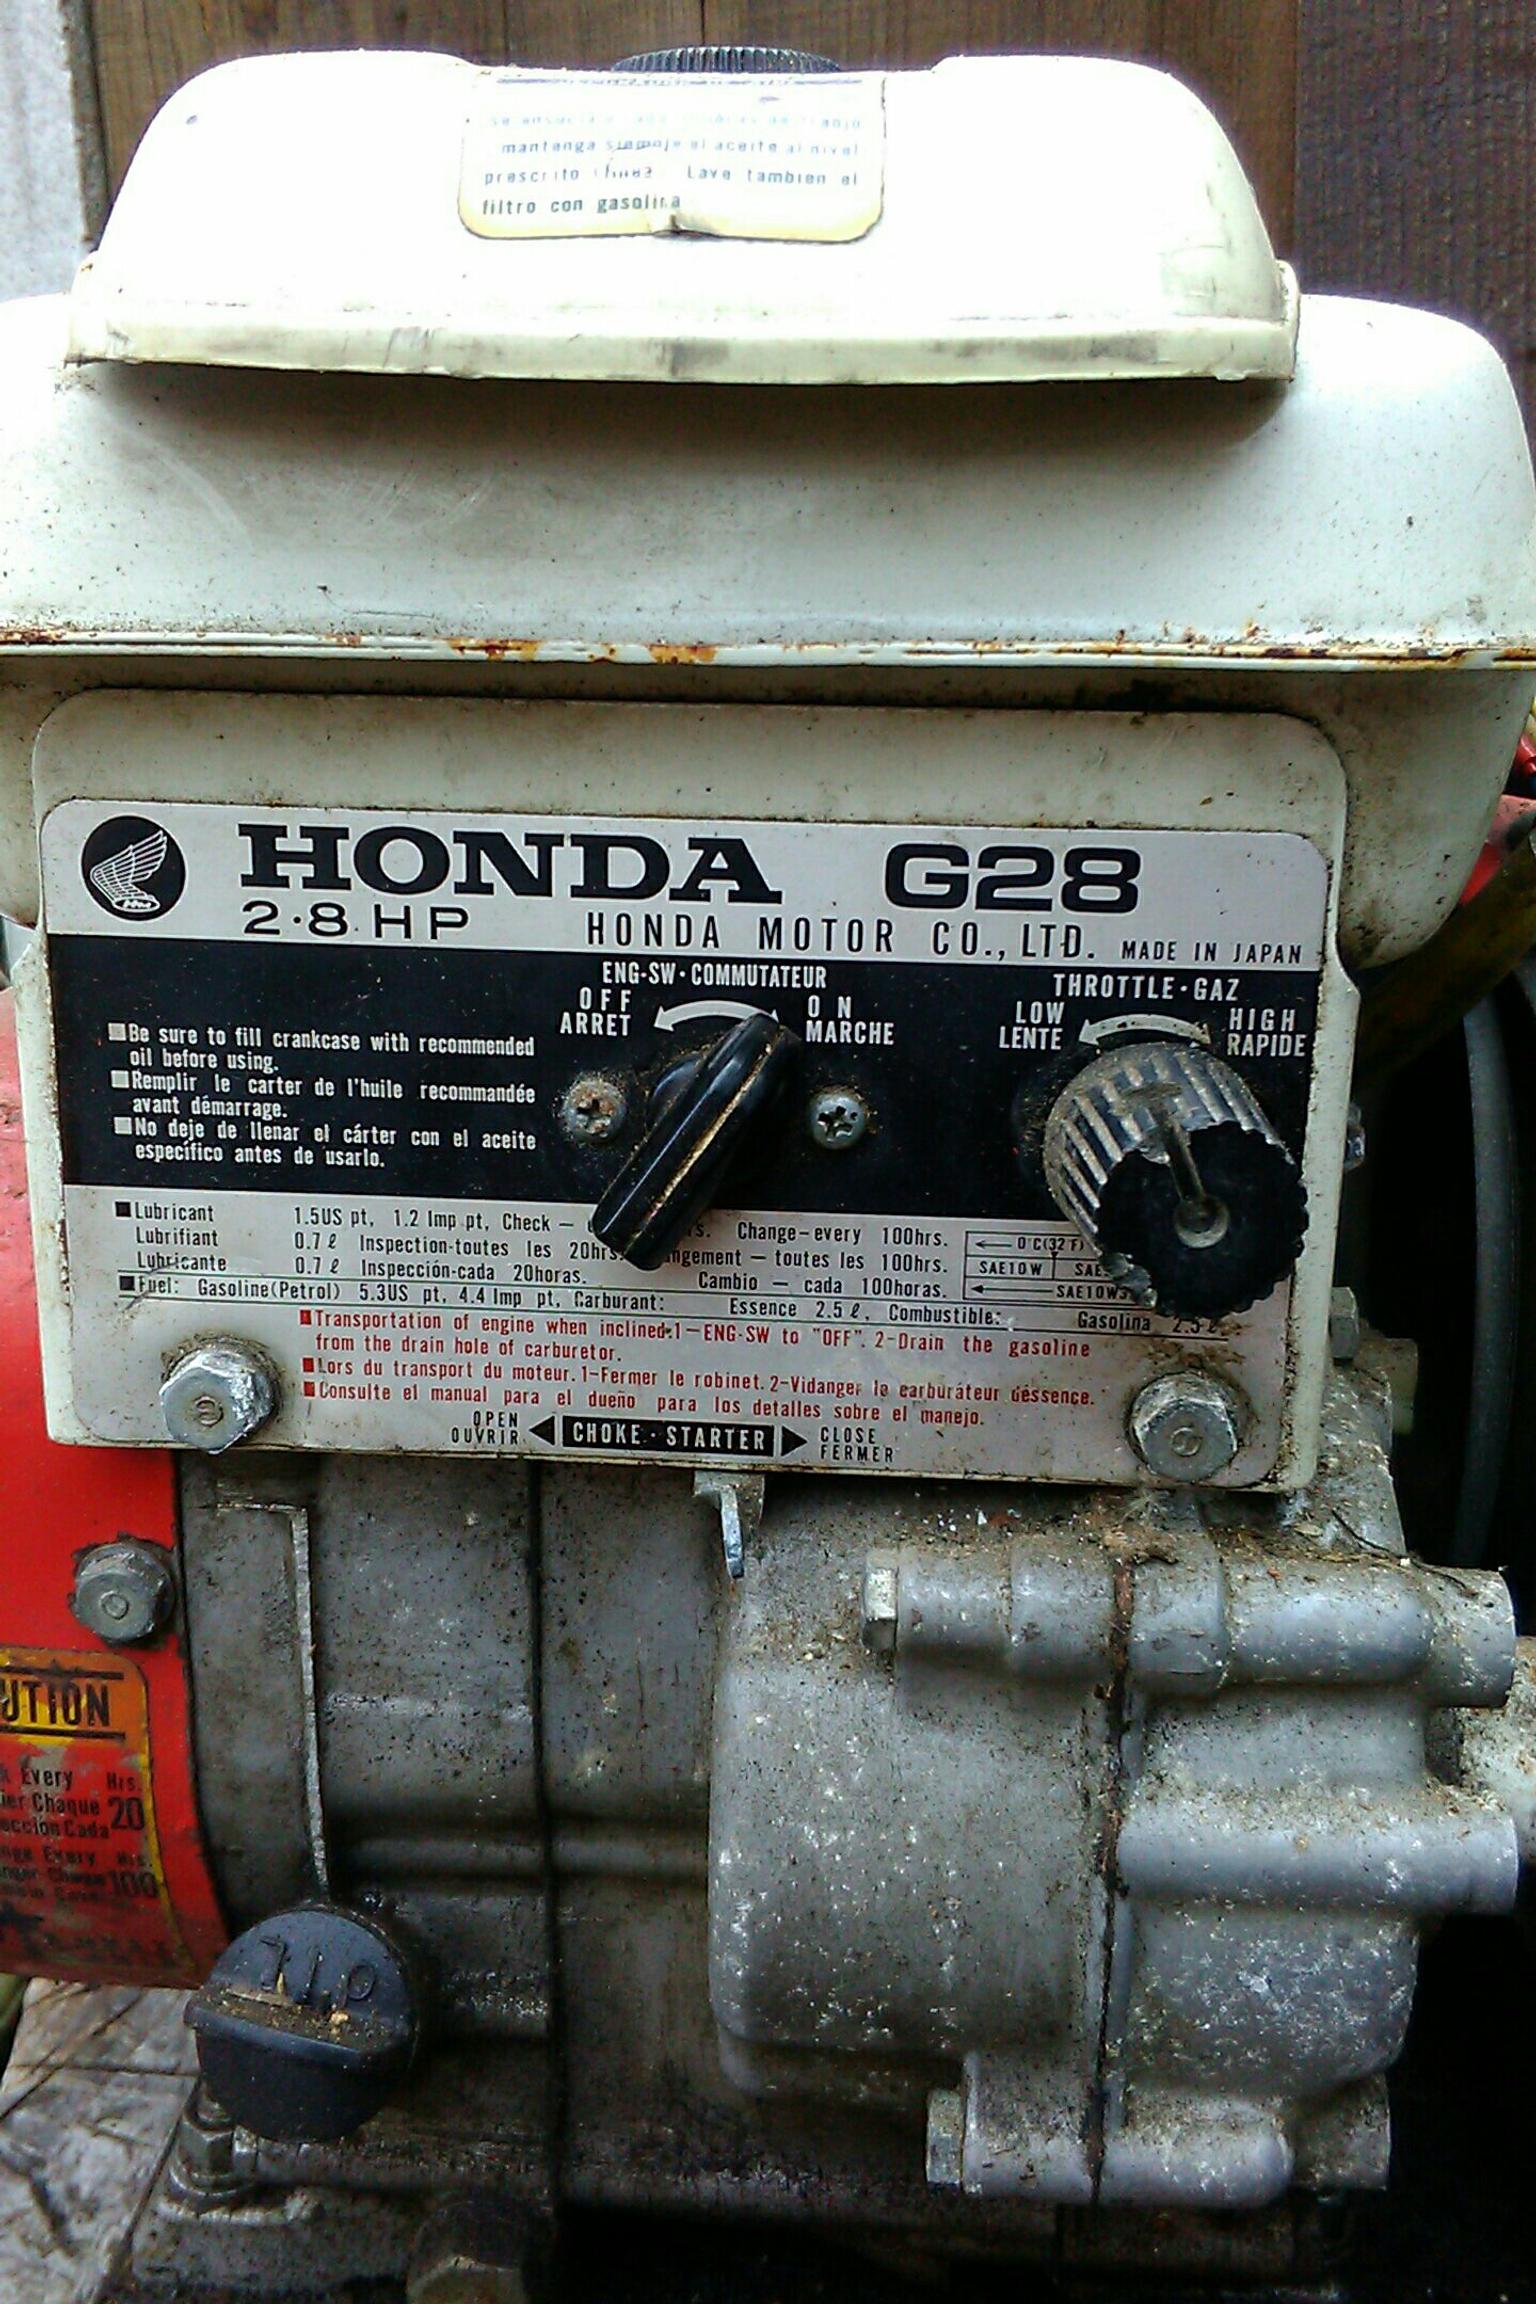 Honda E800E with G28 in LS27 for £30.00 for sale |